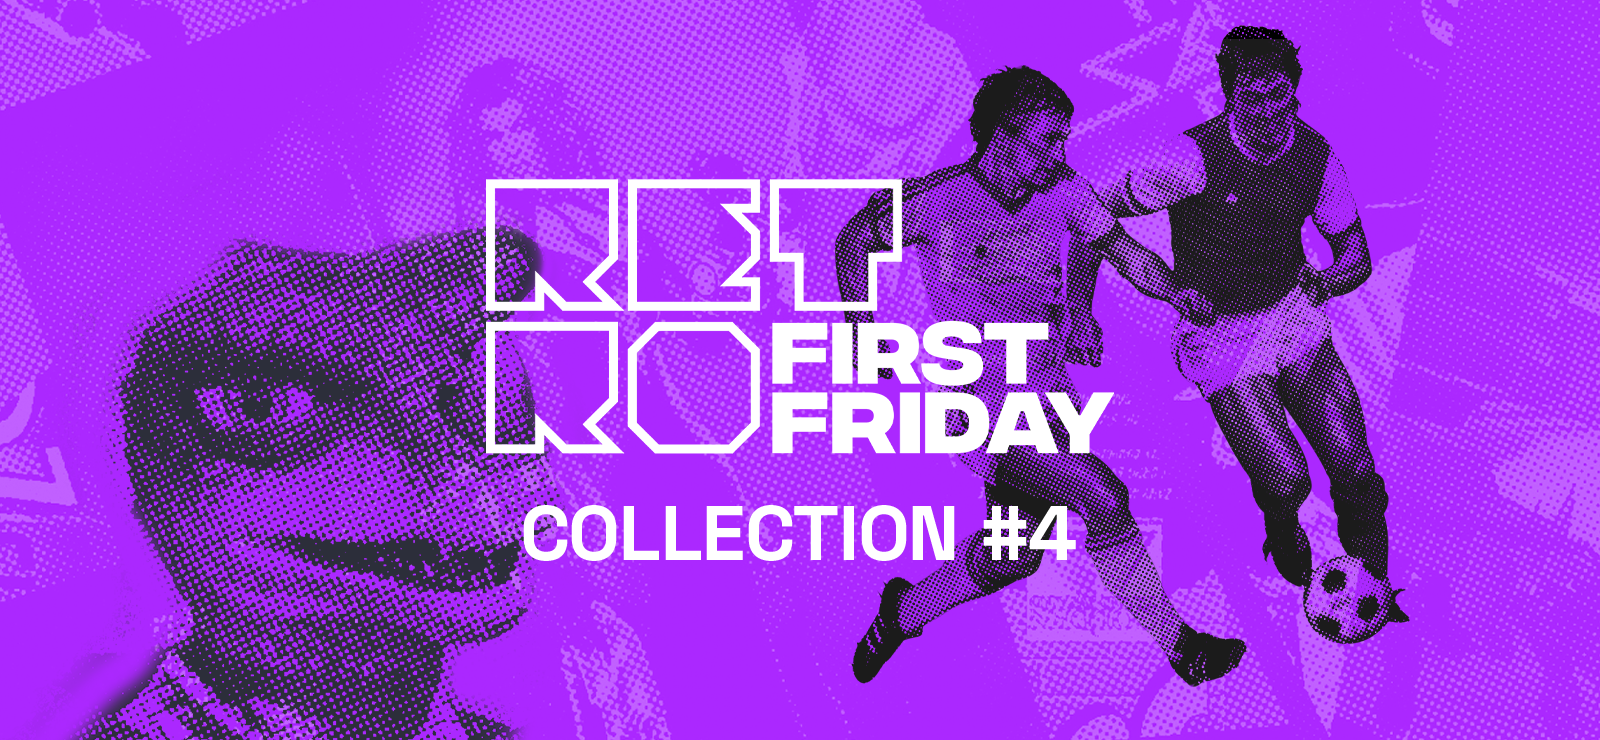 Retro First Friday Collection #4